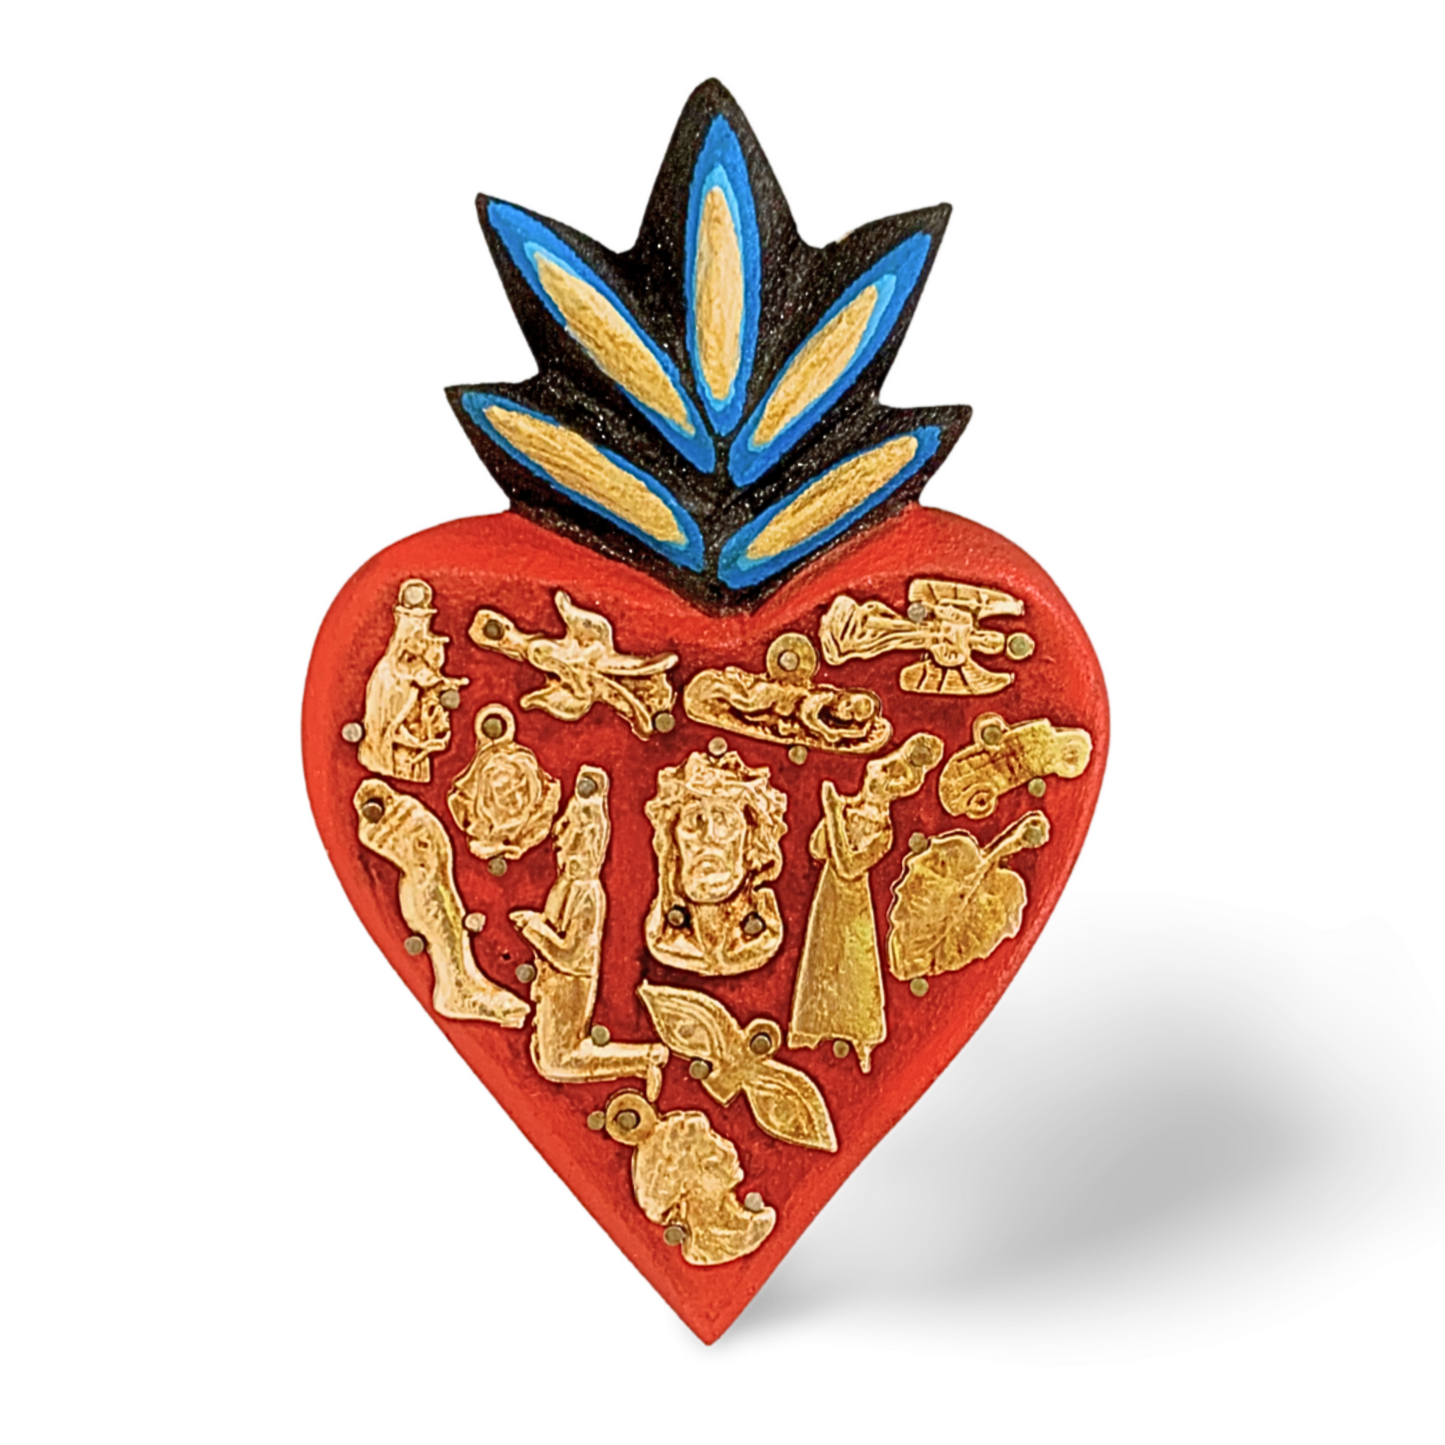 main image Ex Voto Wooden Sacred Heart with Milagros, handcrafted and hand-painted by Mexican artisans, brightens up any room with its vibrant colors.